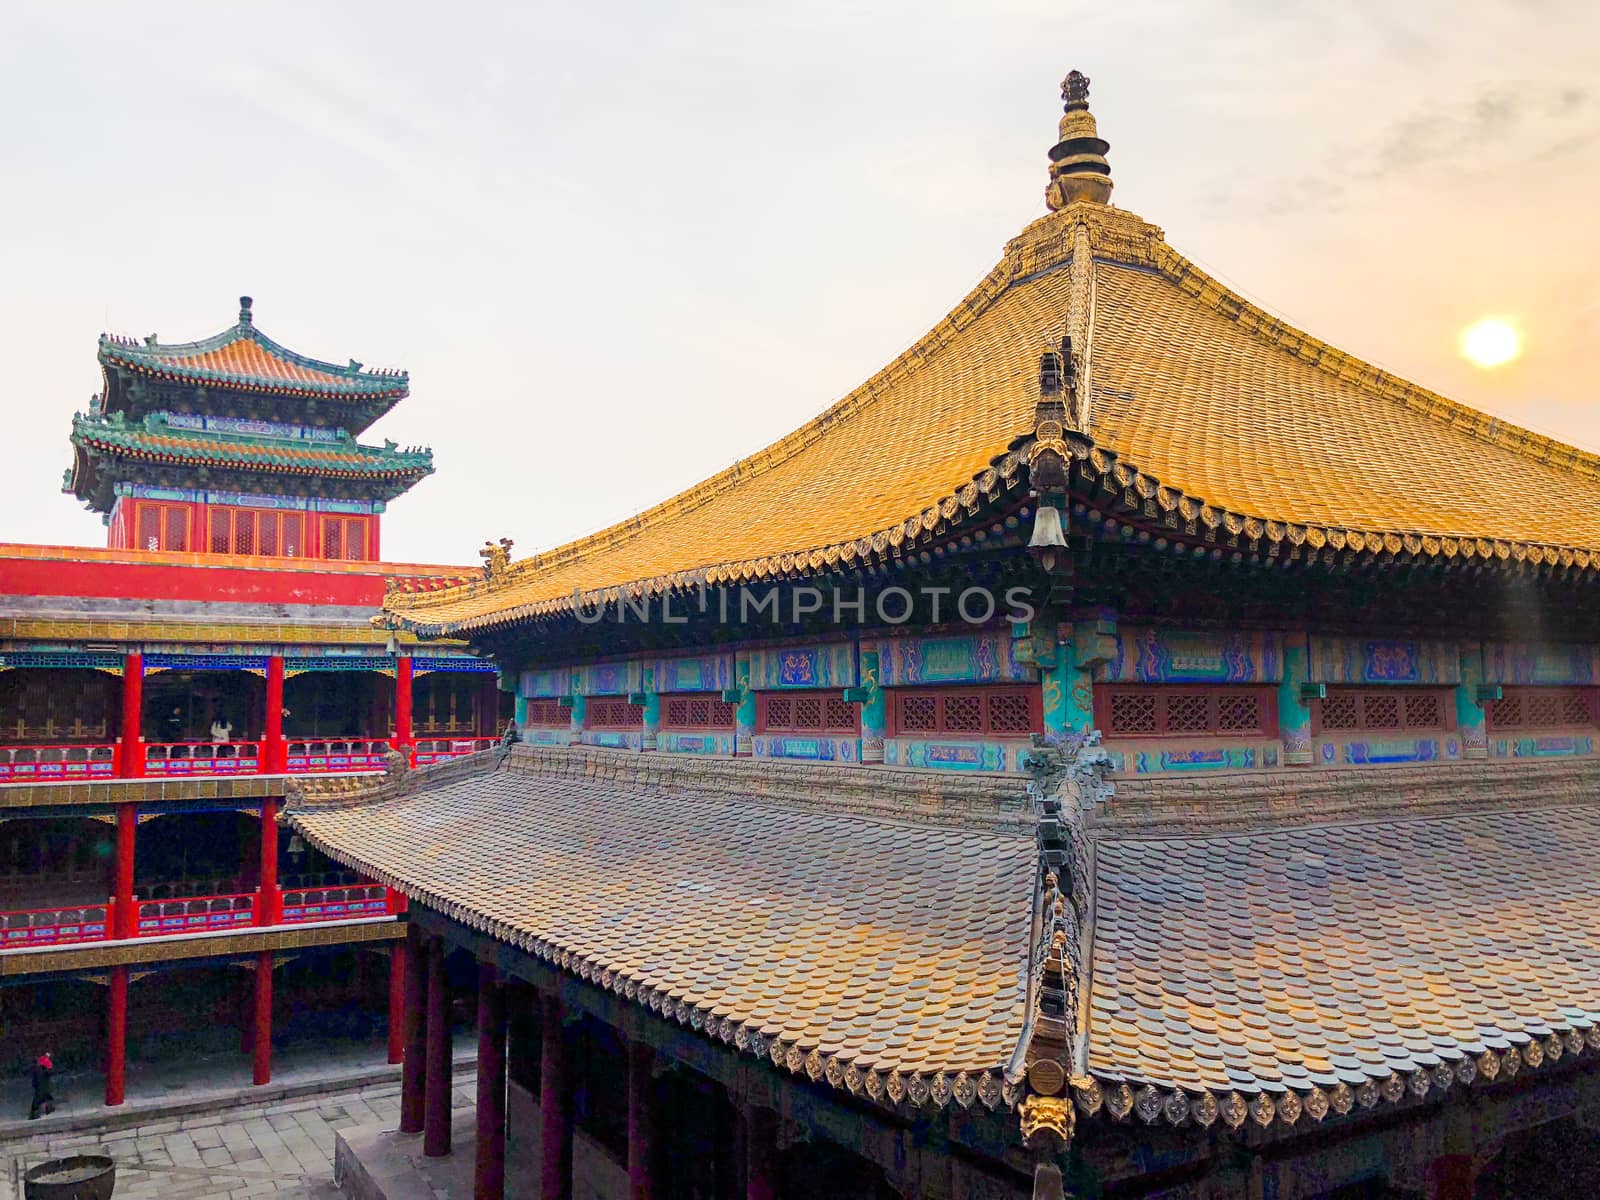 The Putuo Zongcheng Buddhist Temple, one of the Eight Outer Temples of Chengde, China by Bonandbon